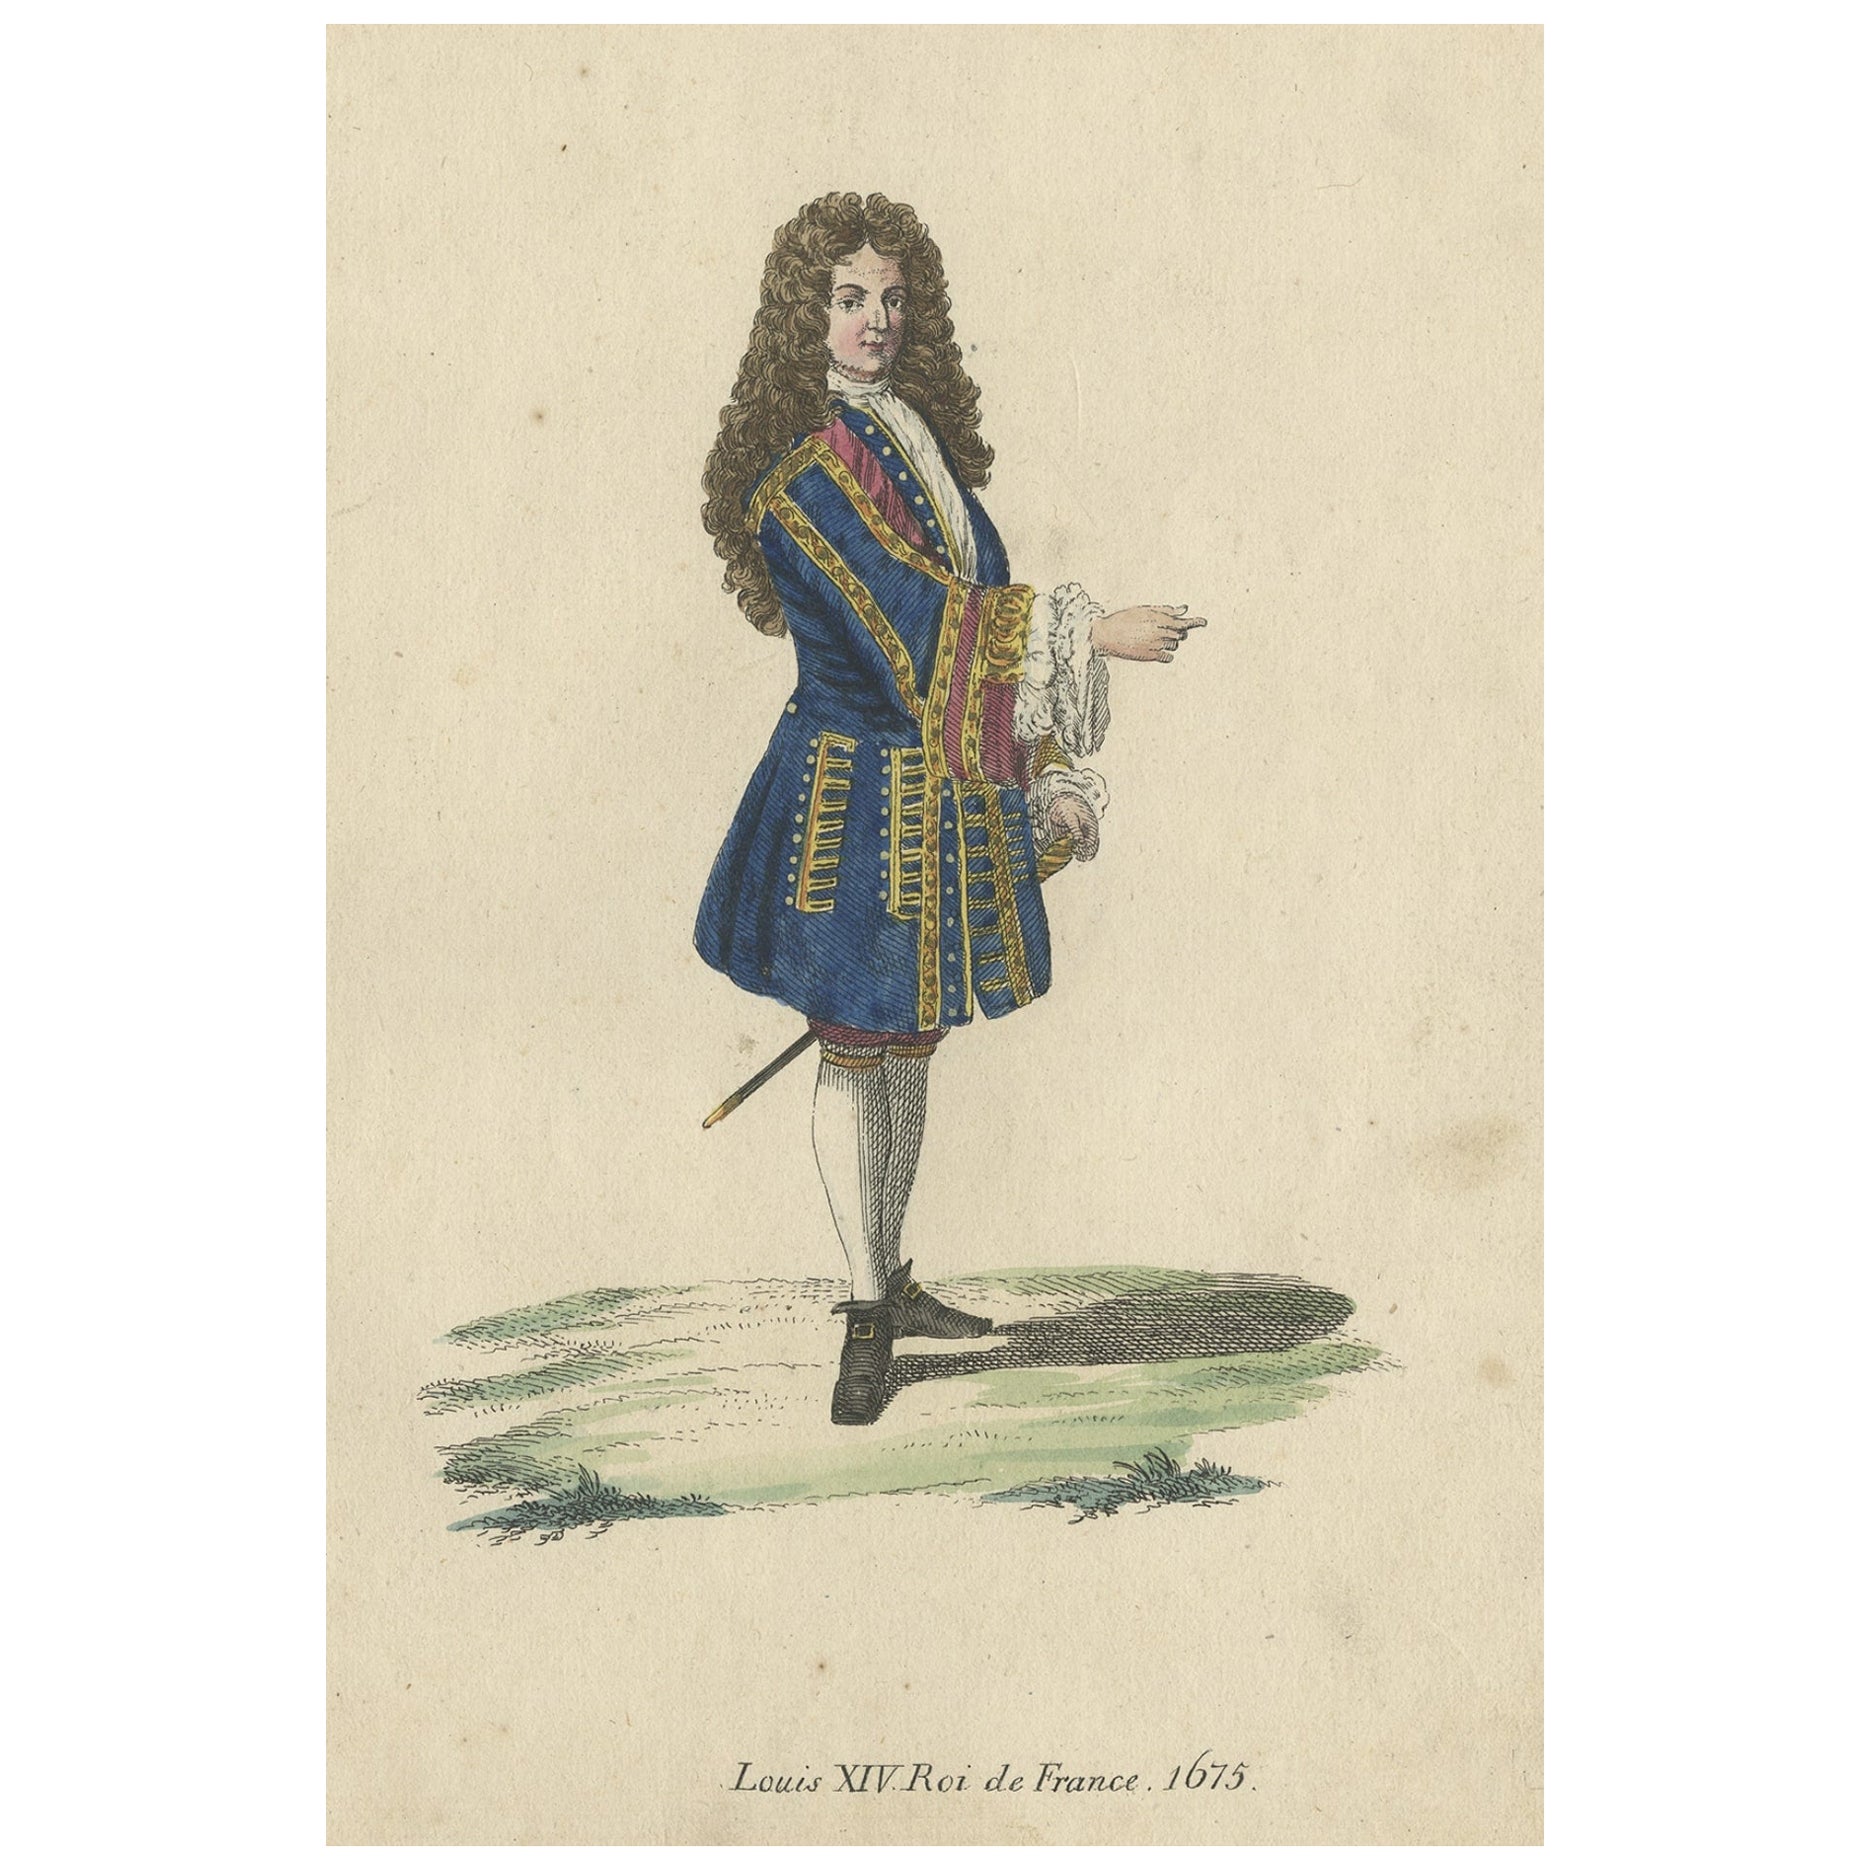 Original Hand-Colored Copper Engraving of Louis XIV or The Sun King, 1805